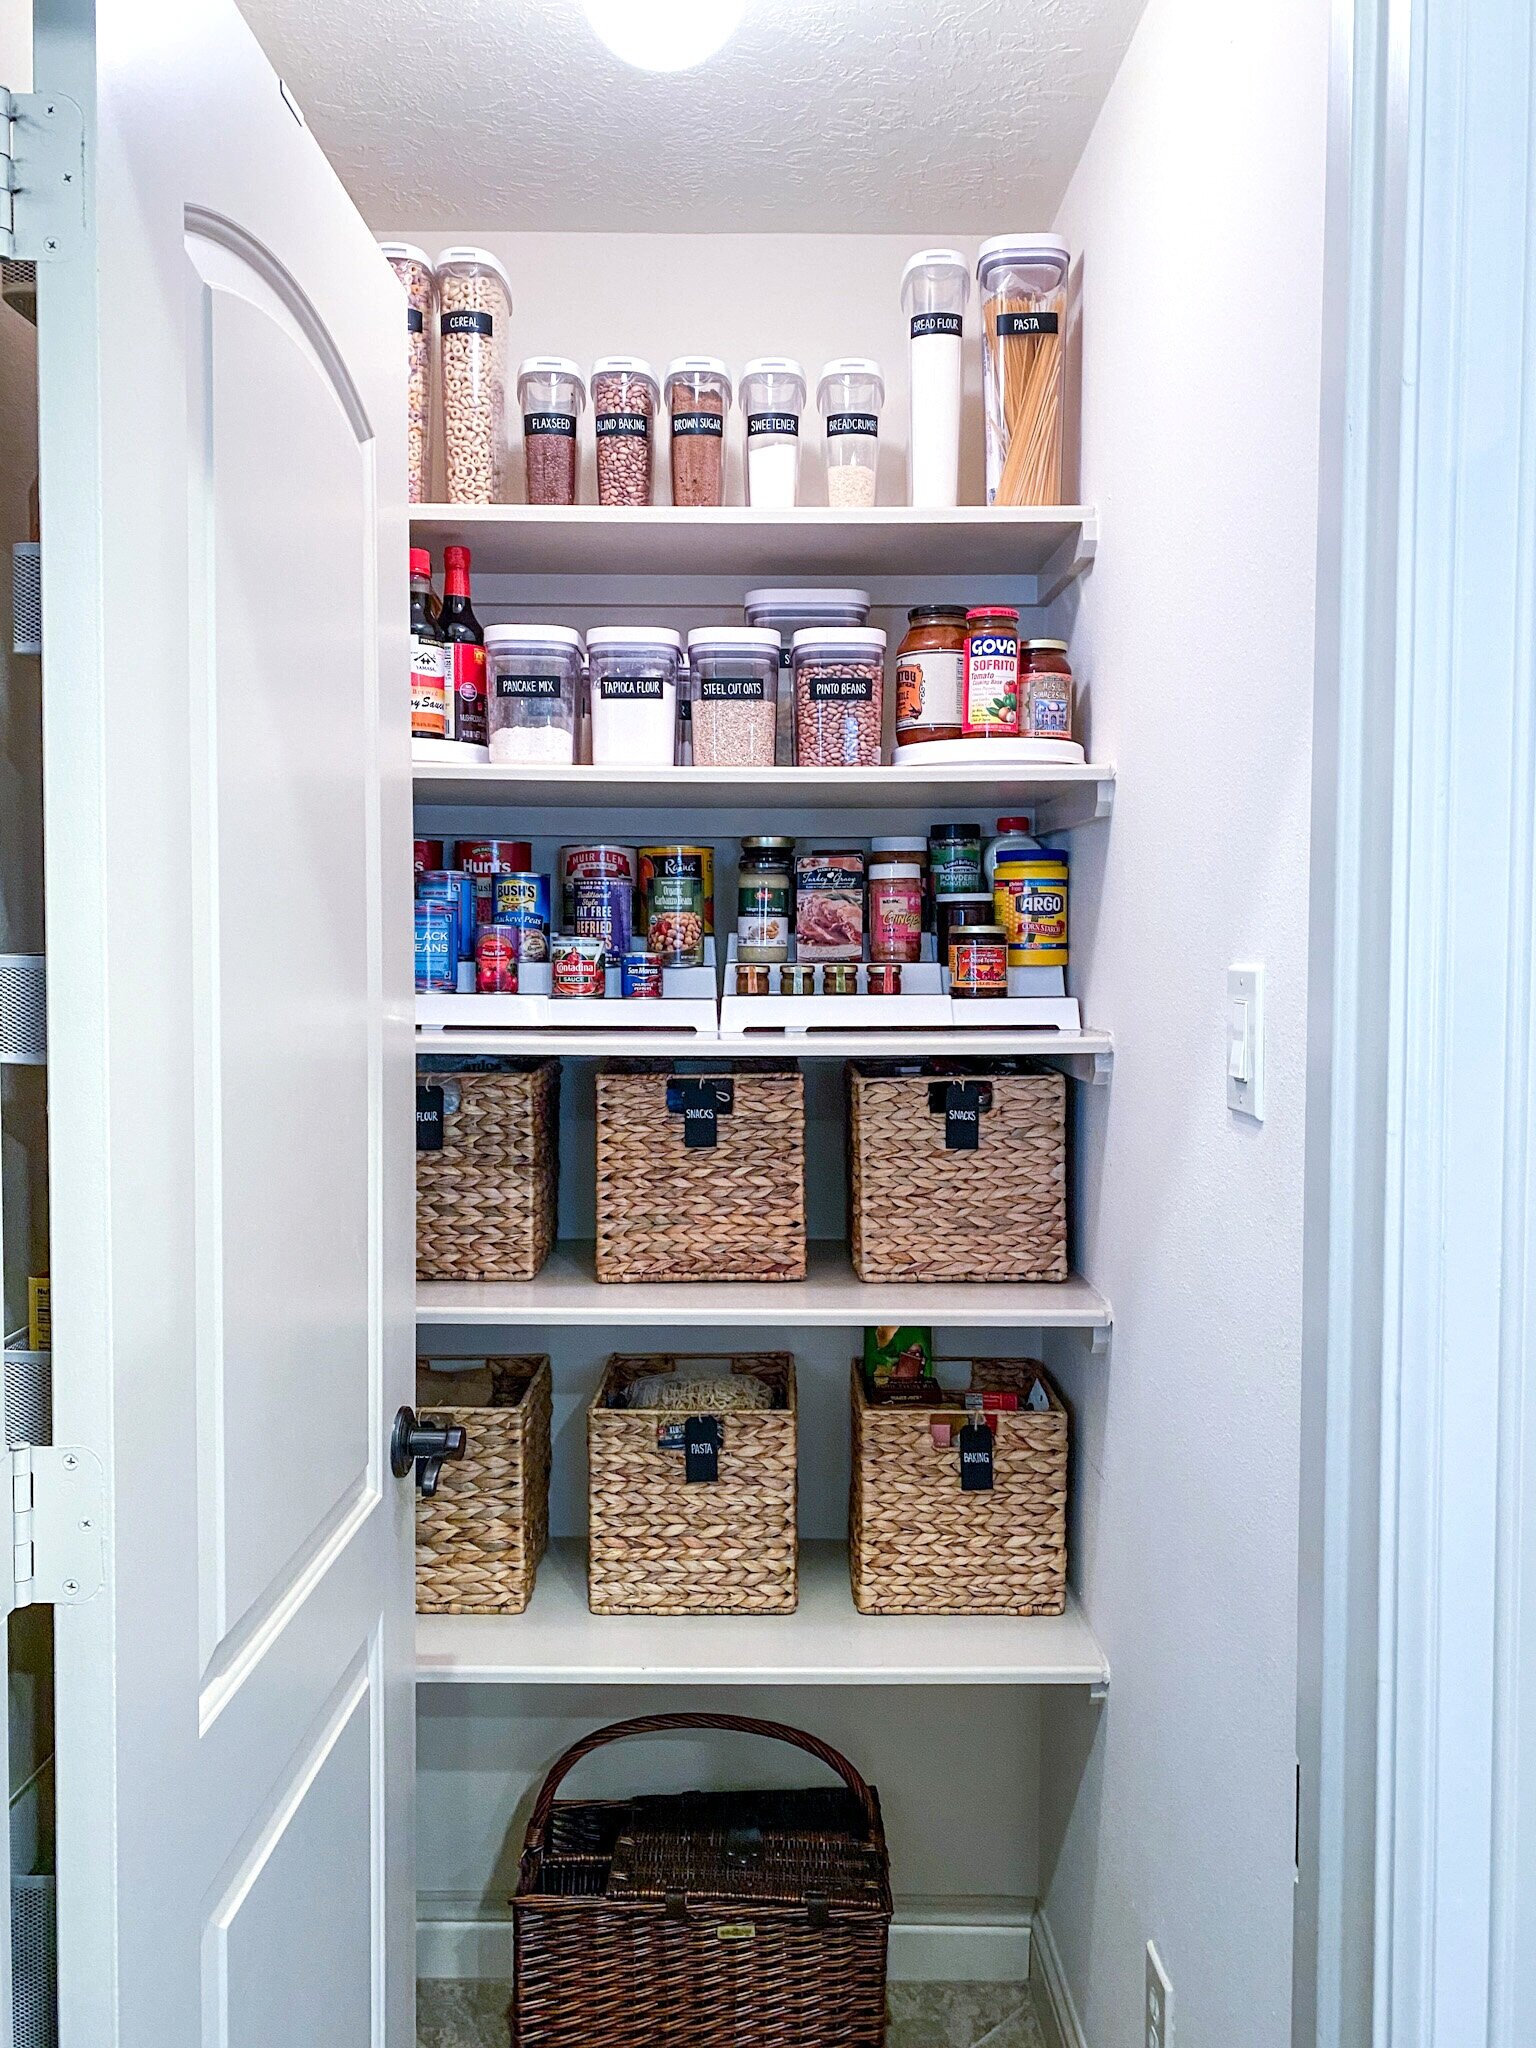 How to Organize Your Pantry and Keep It Tidy, According to Experts